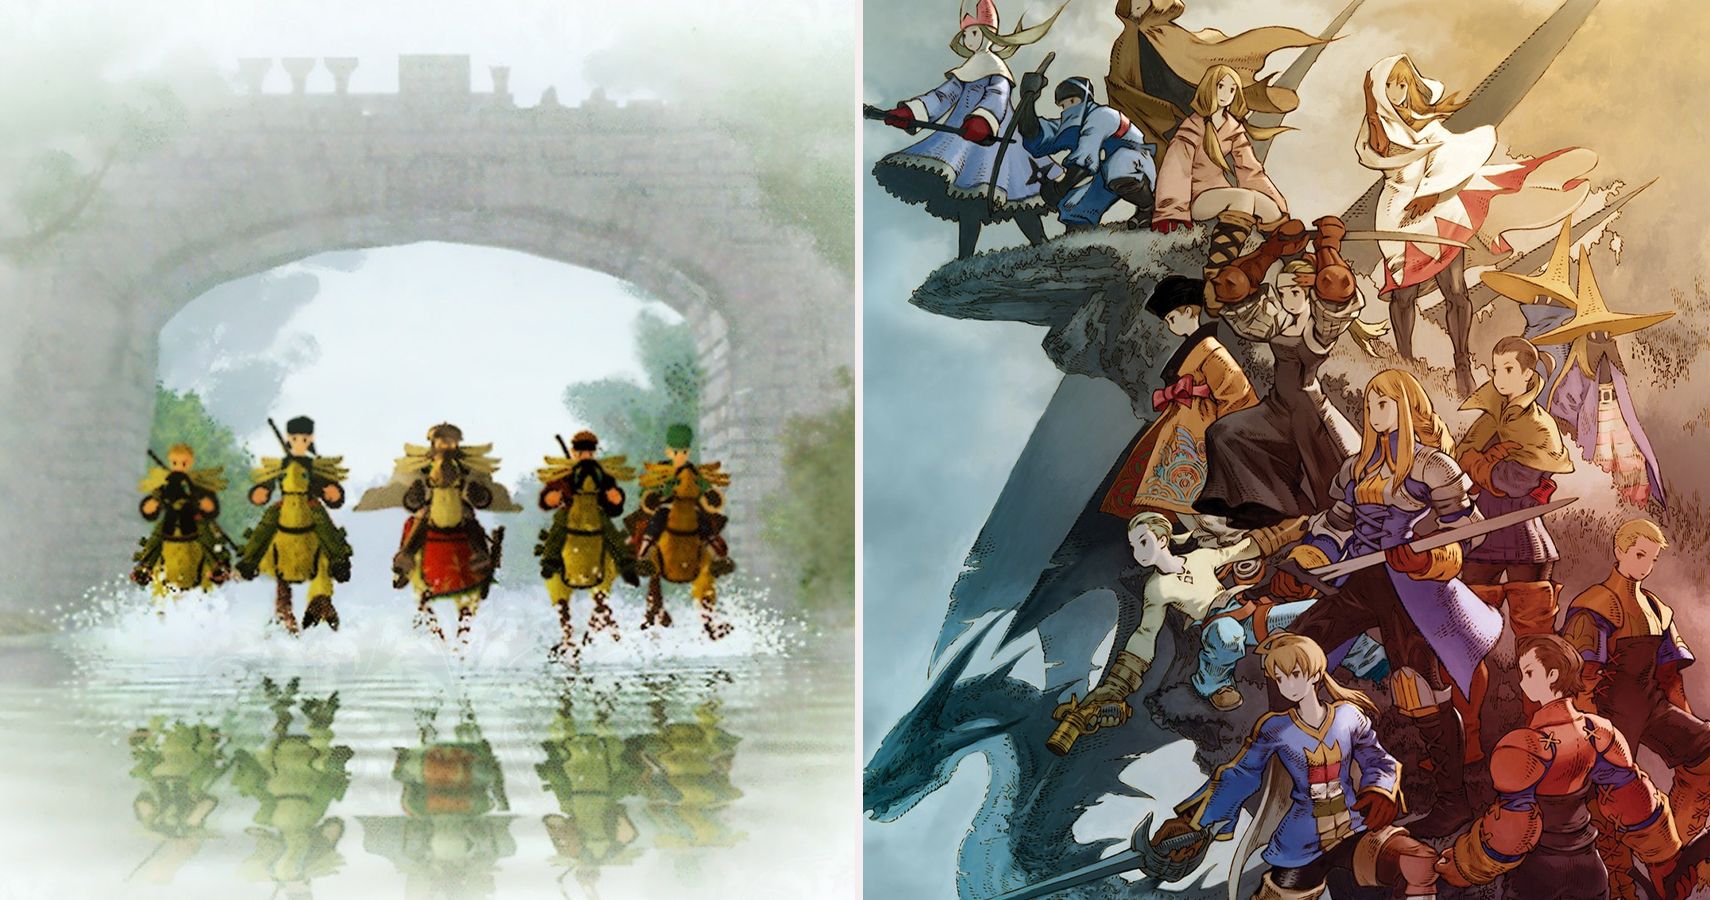 all-11-special-jobs-from-final-fantasy-tactics-ranked